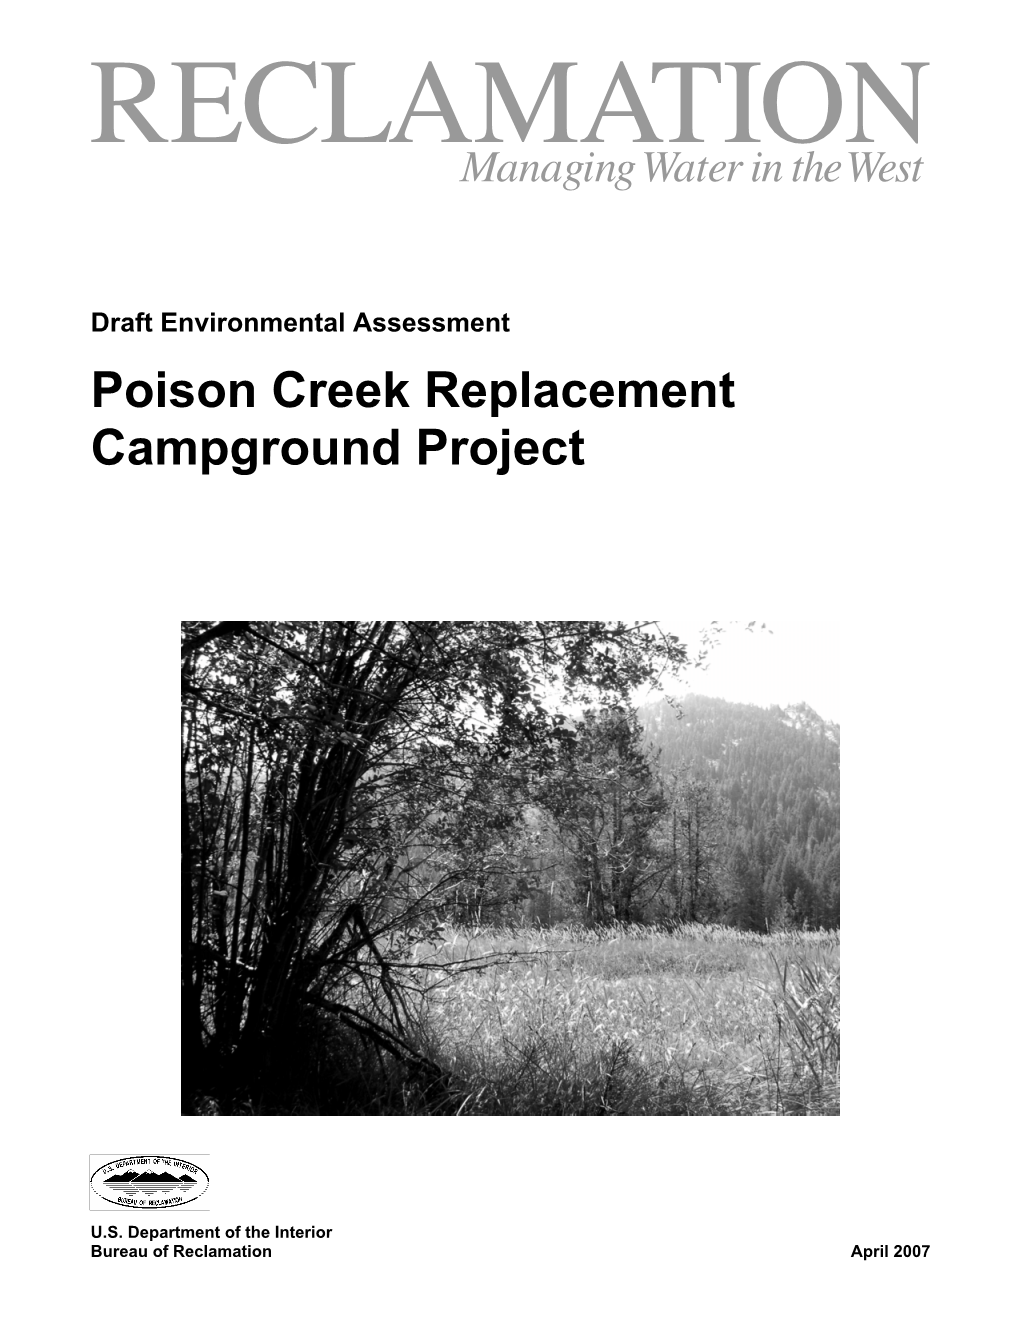 Poison Creek Replacement Campground Project Draft EA